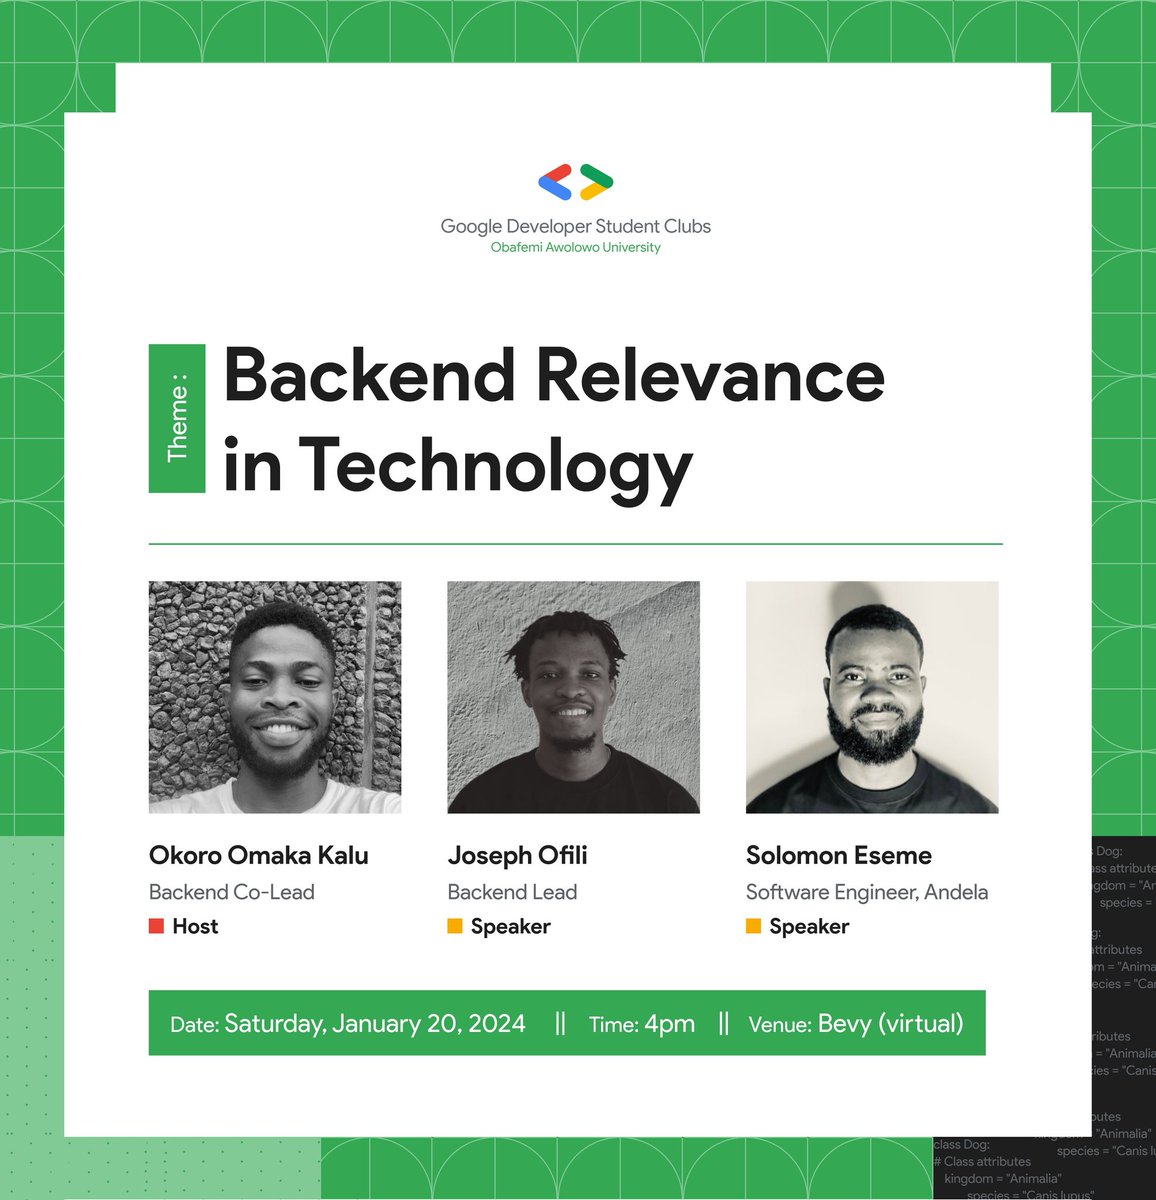 Backend Relevance in Technology

I'll be speaking at this event on Saturday!

@DSCOAU